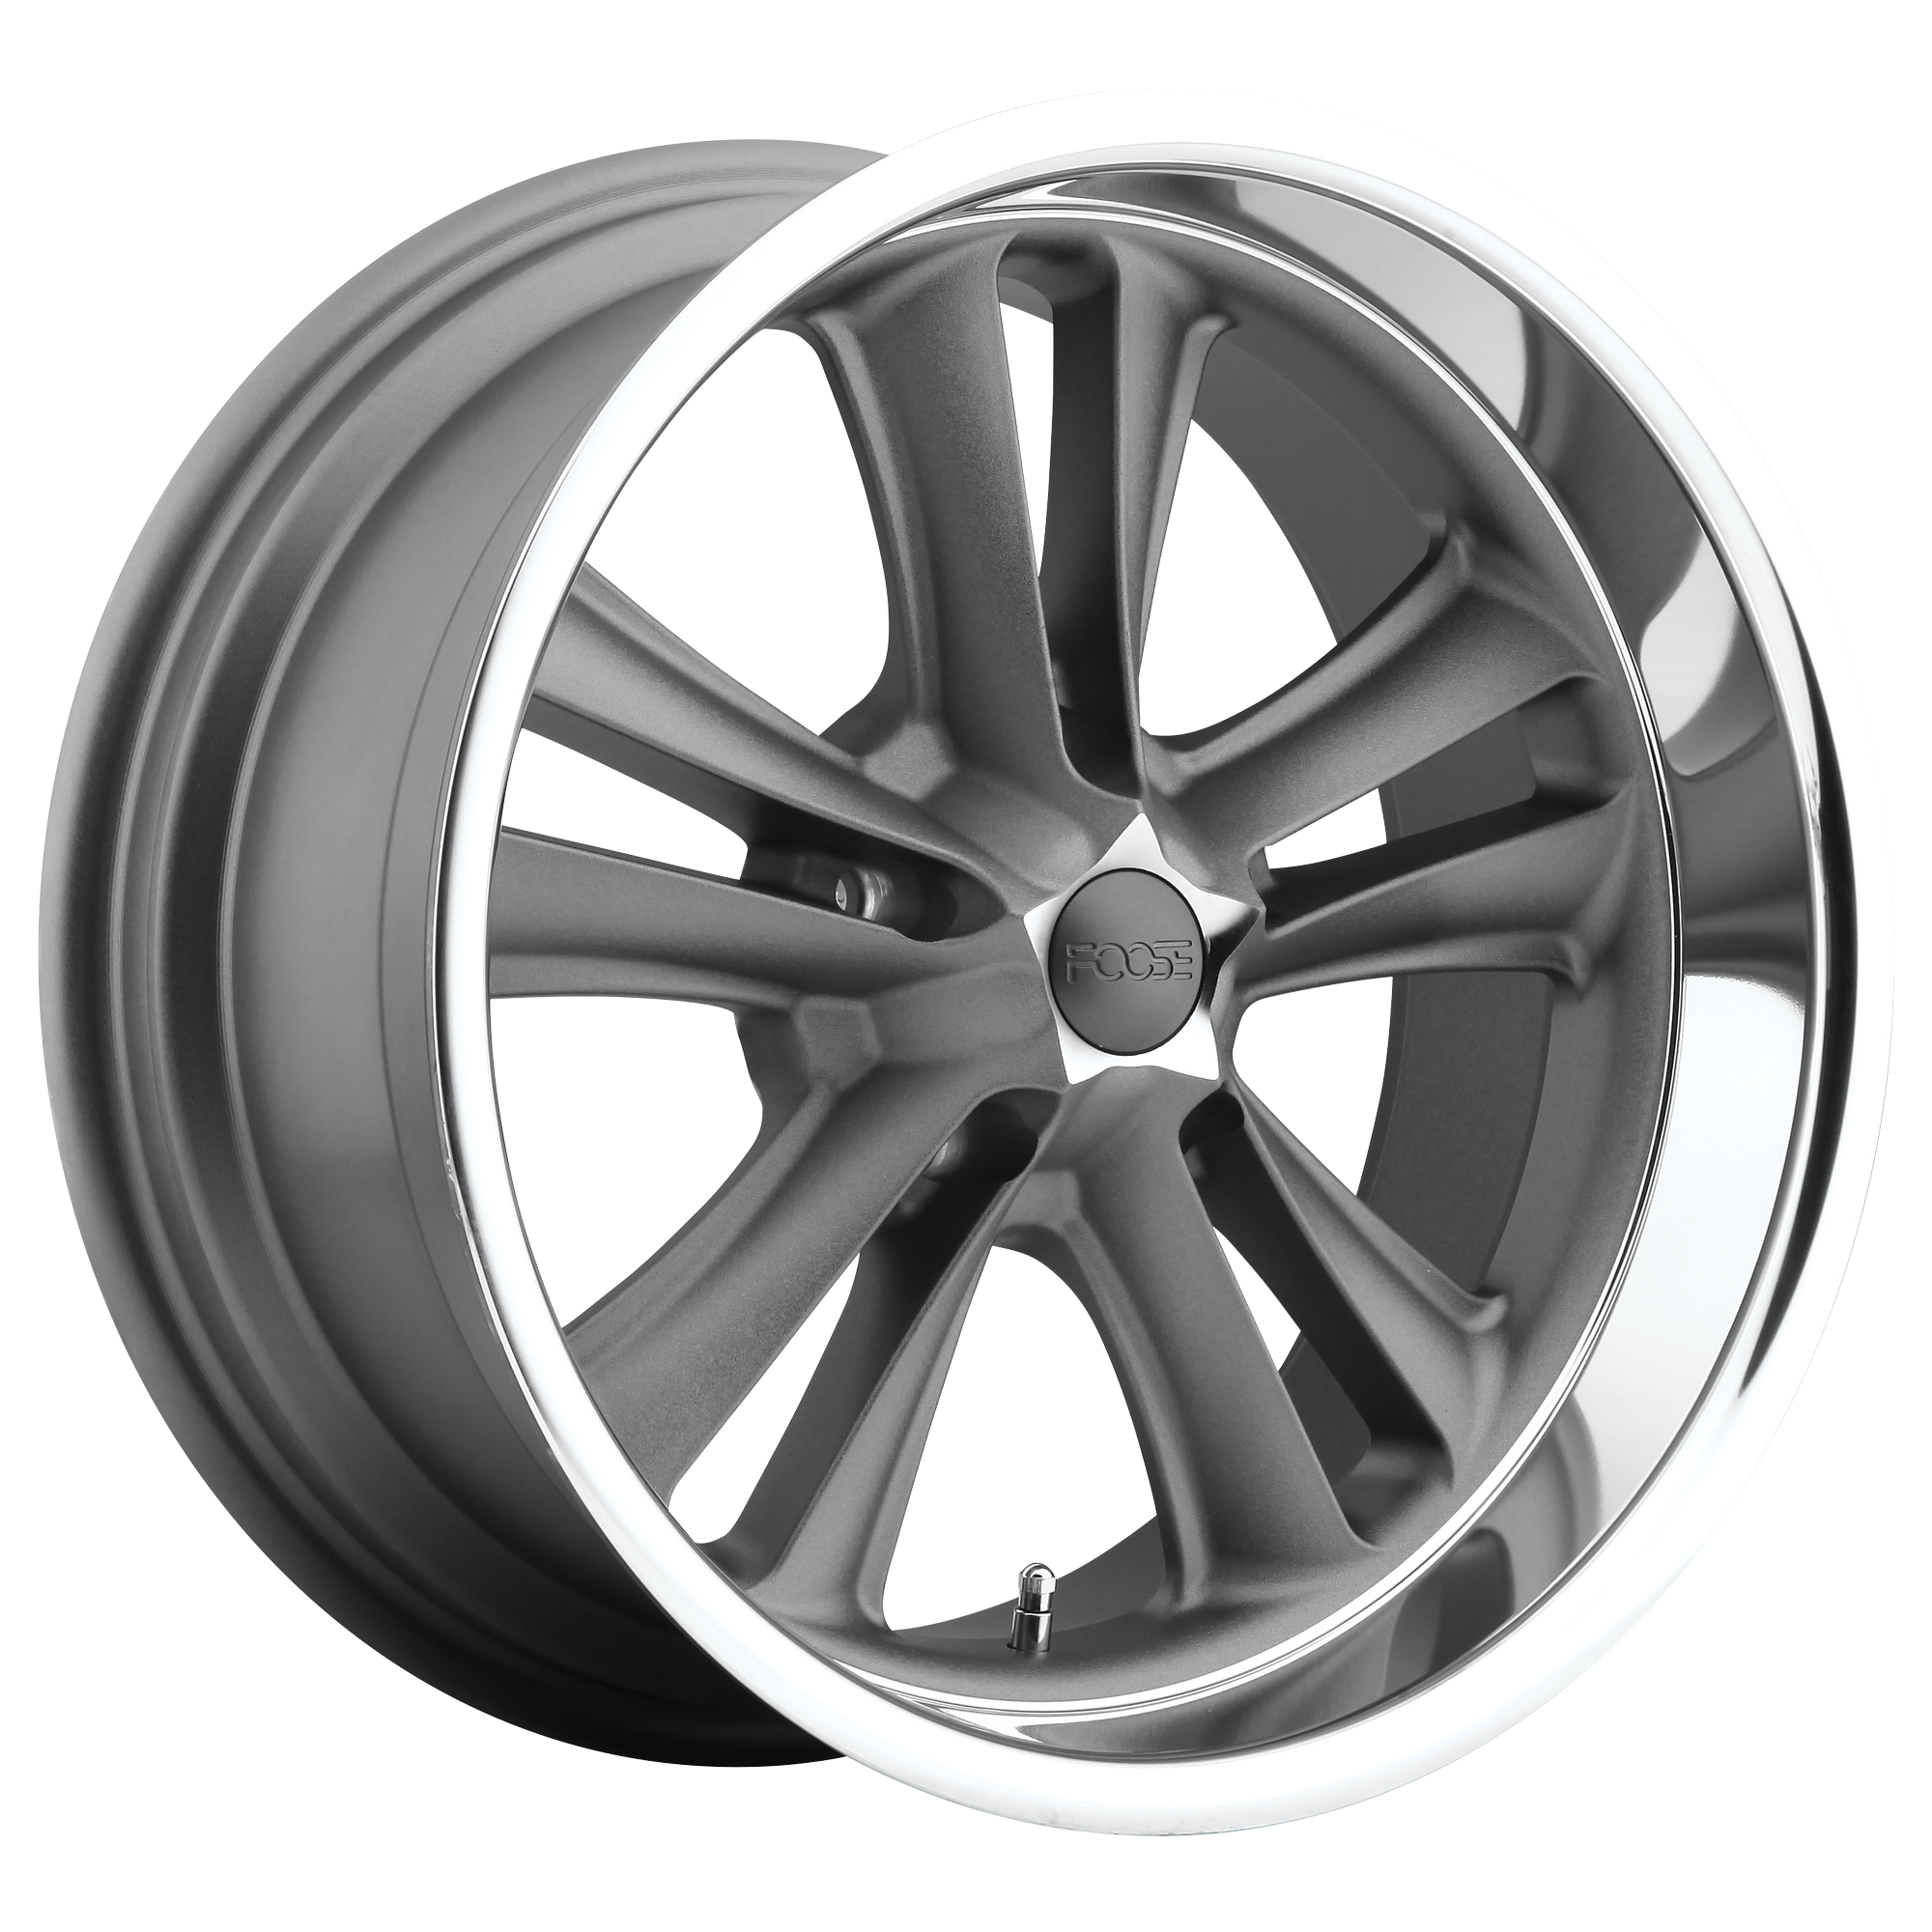 KNUCKLE 18x8 5x120.65 MATTE GUN METAL MACHINED (1 mm) - Tires and Engine Performance